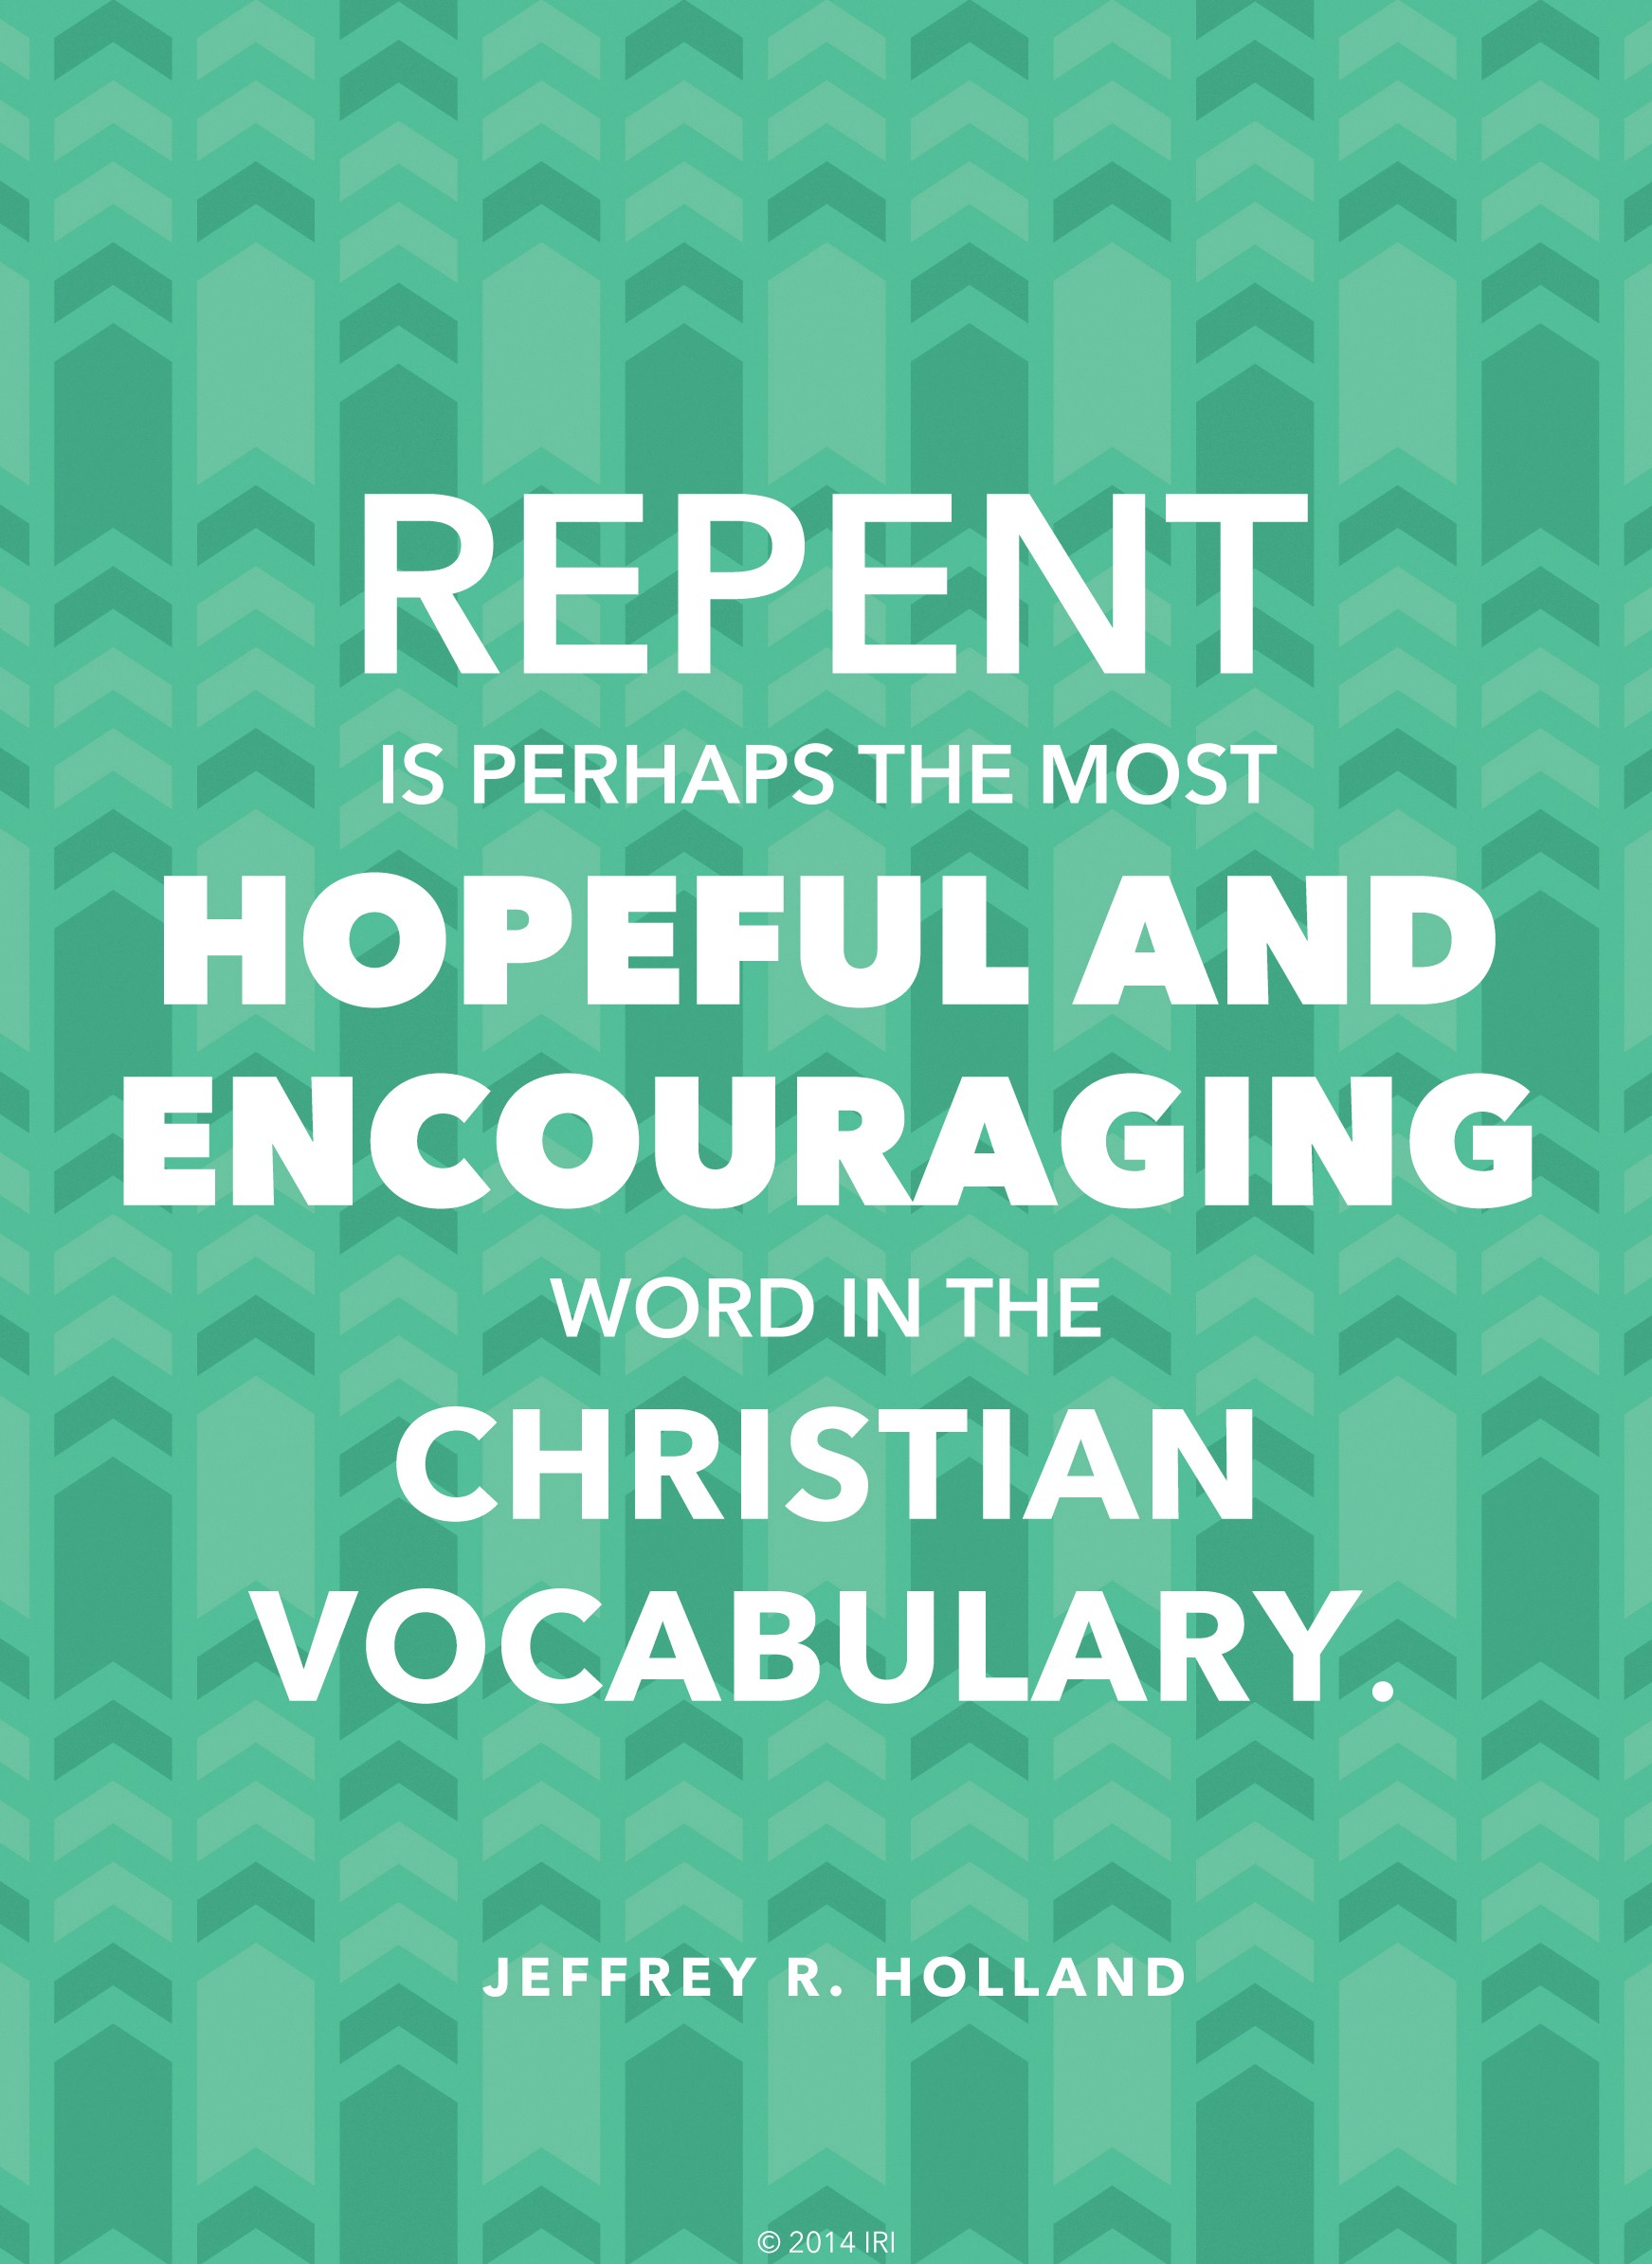 A green arrow-patterned background coupled with a quote by Elder Jeffrey R. Holland: “Repent is … the most hopeful and encouraging word.”